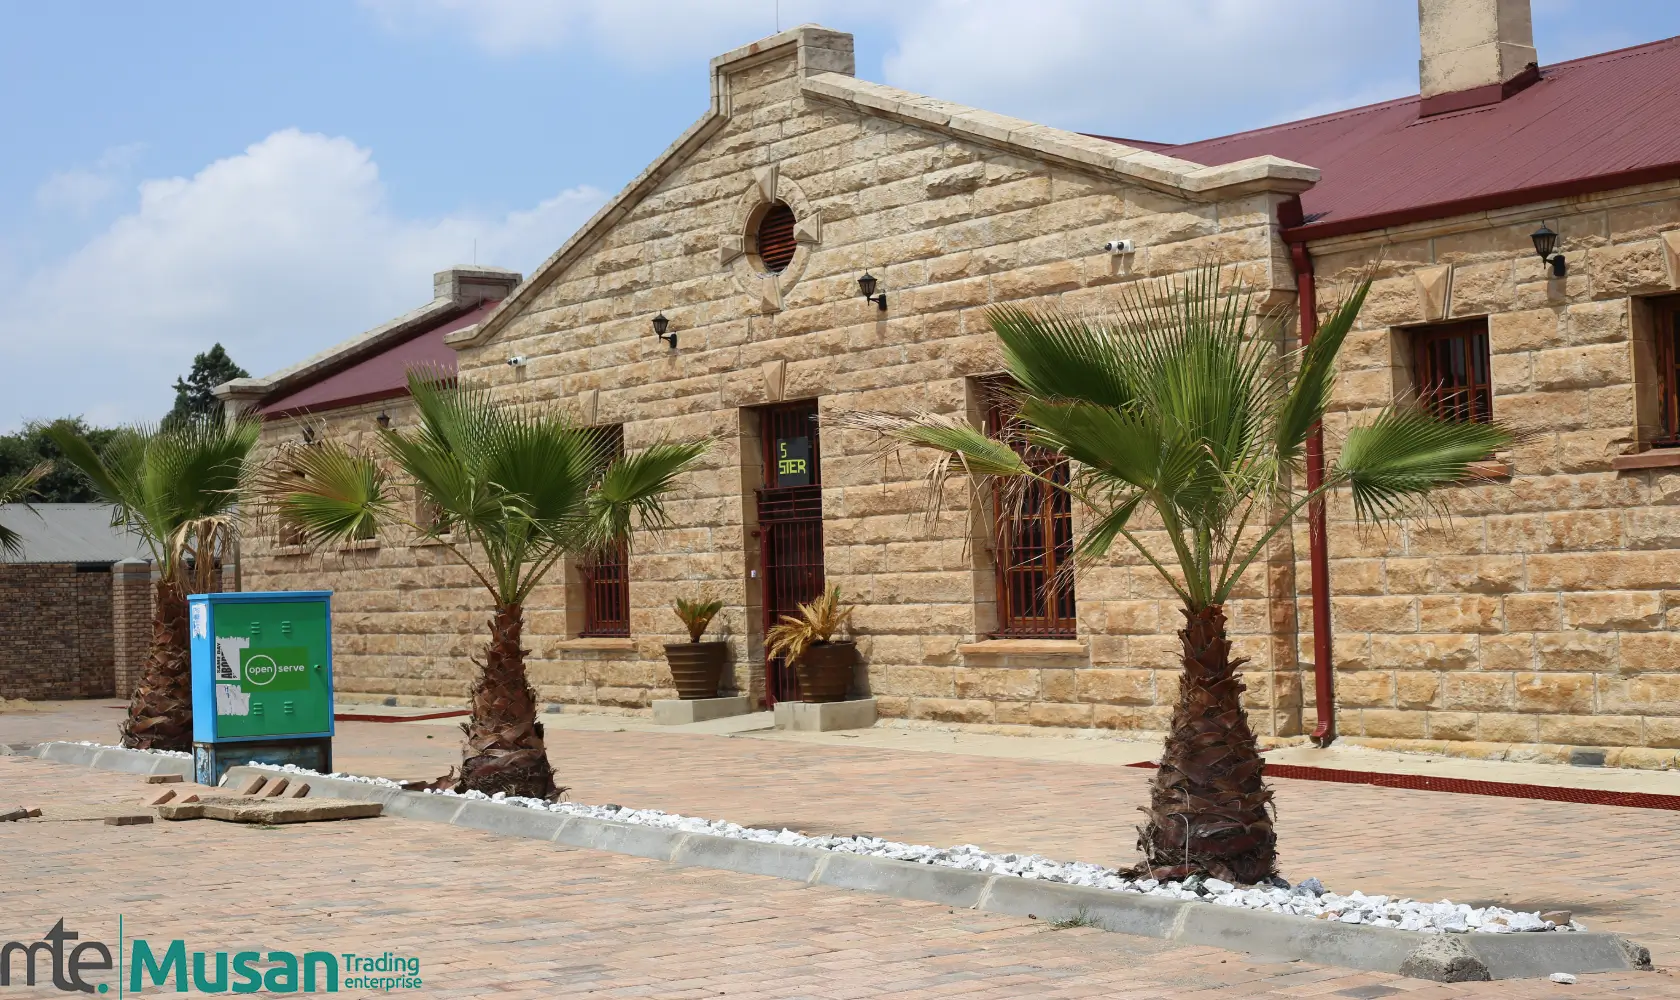 Ermelo Heritage Building Project